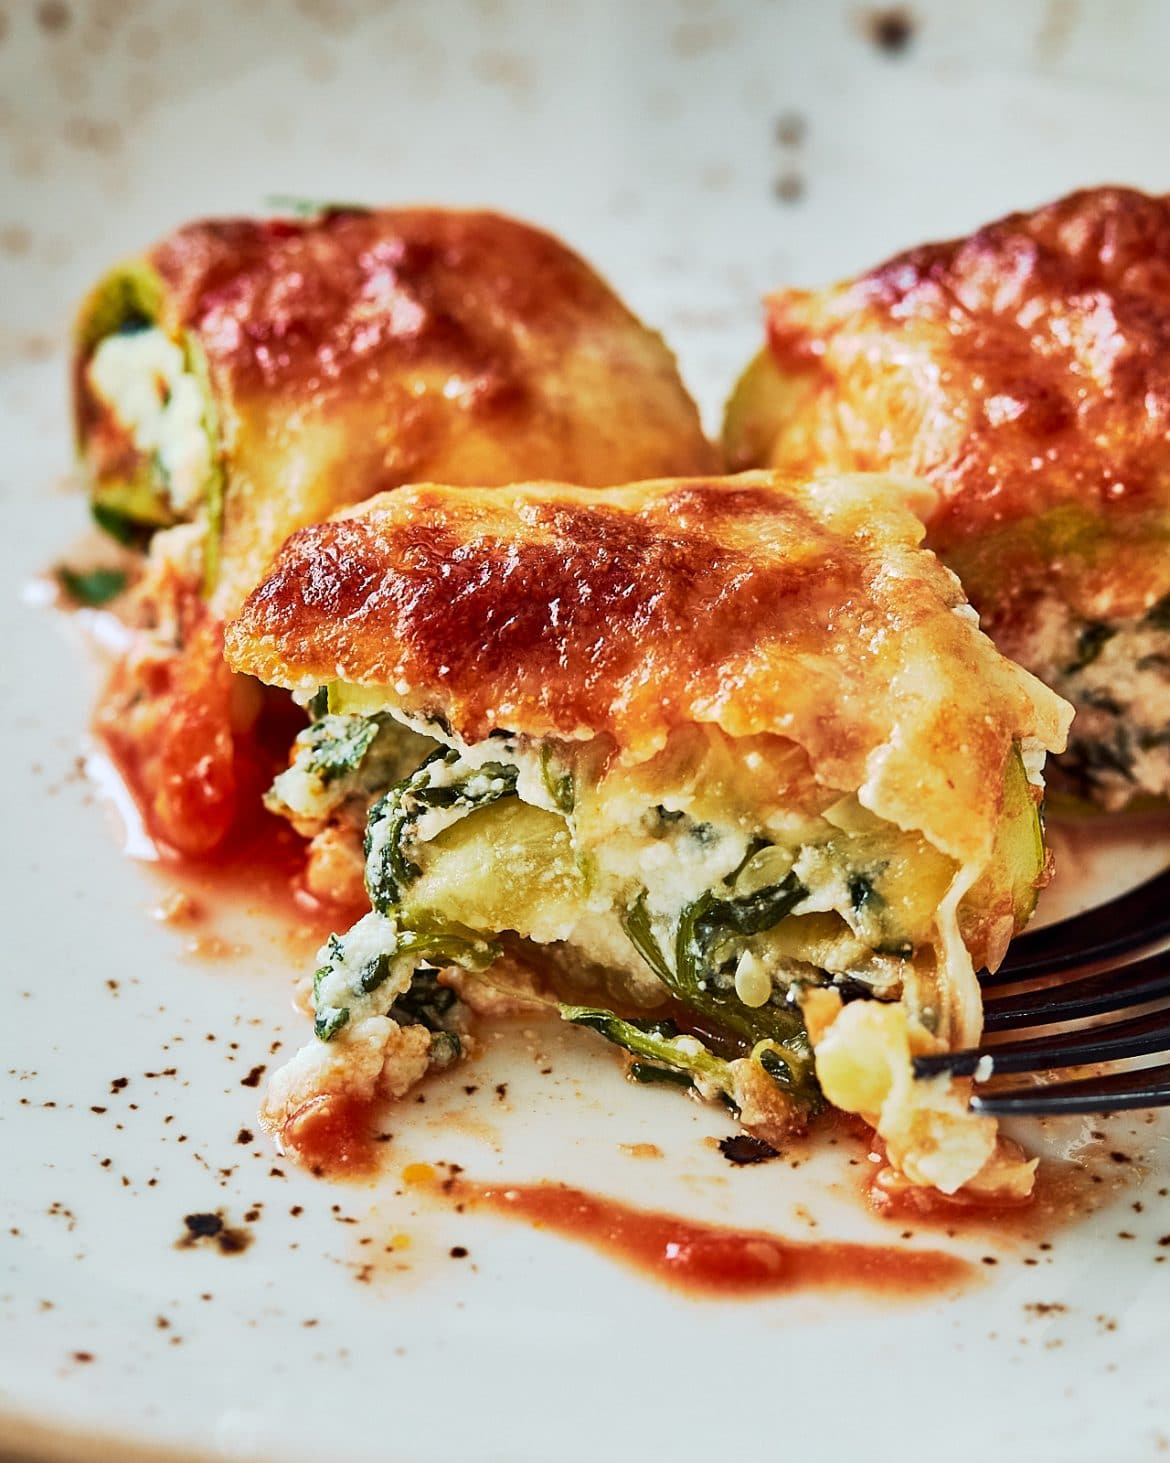 Zucchini Roll-ups With Spinach & Cheese